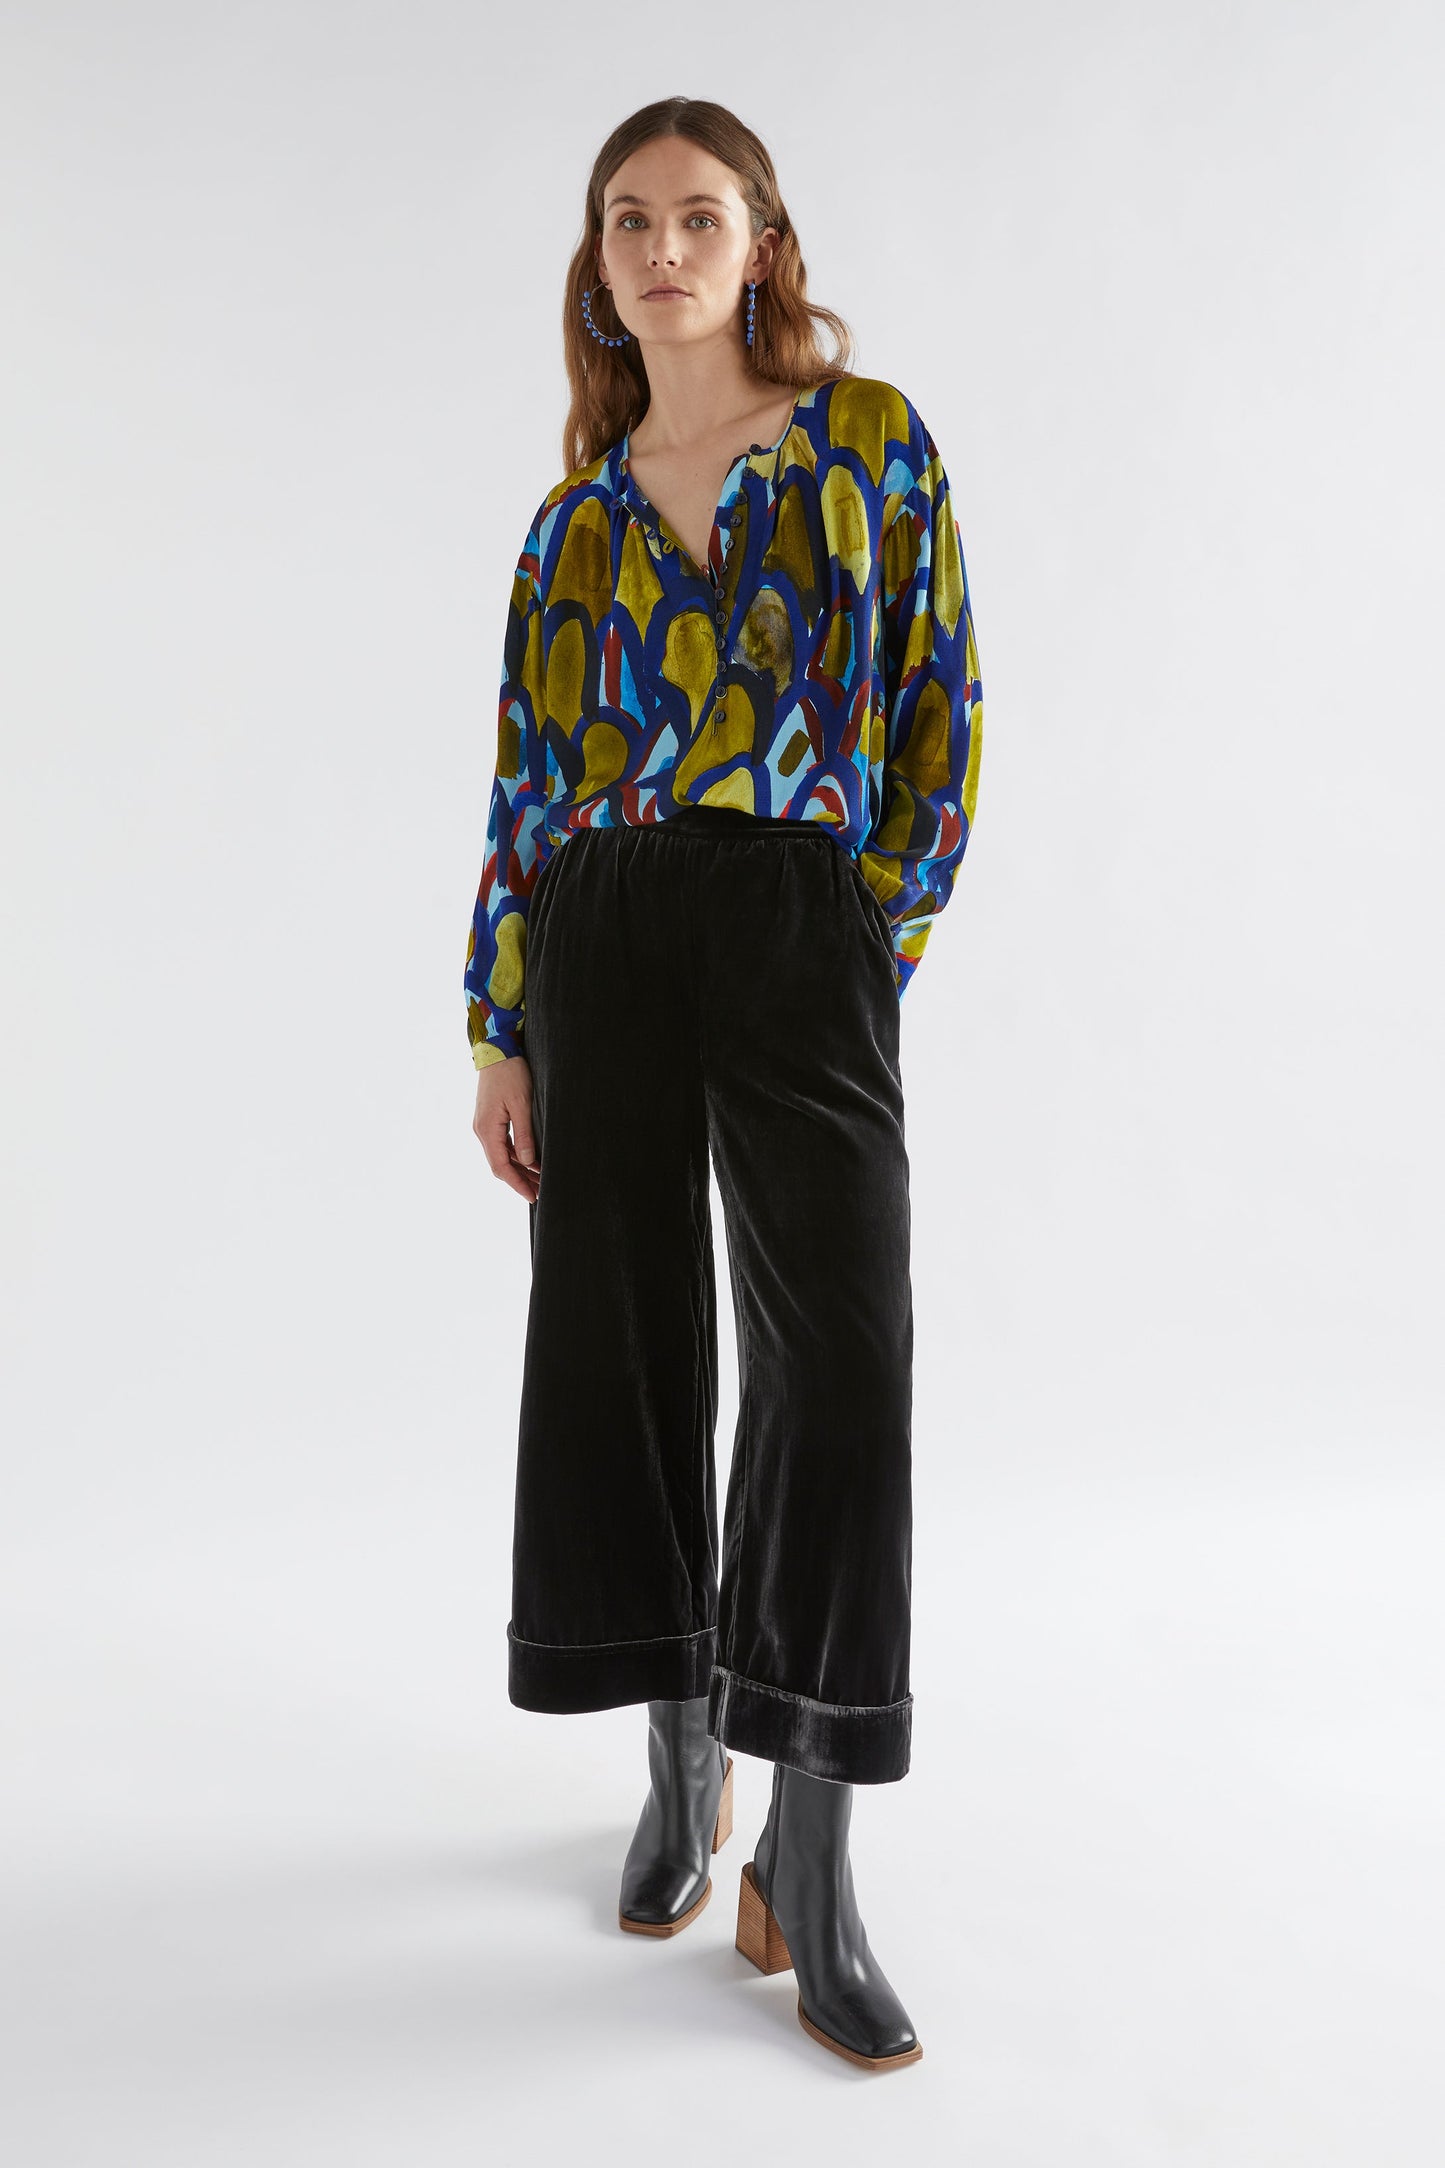 Galerie A-line Collarless Print Shirt with Back Pleat Detail Model Full body Front | BUE PRINT